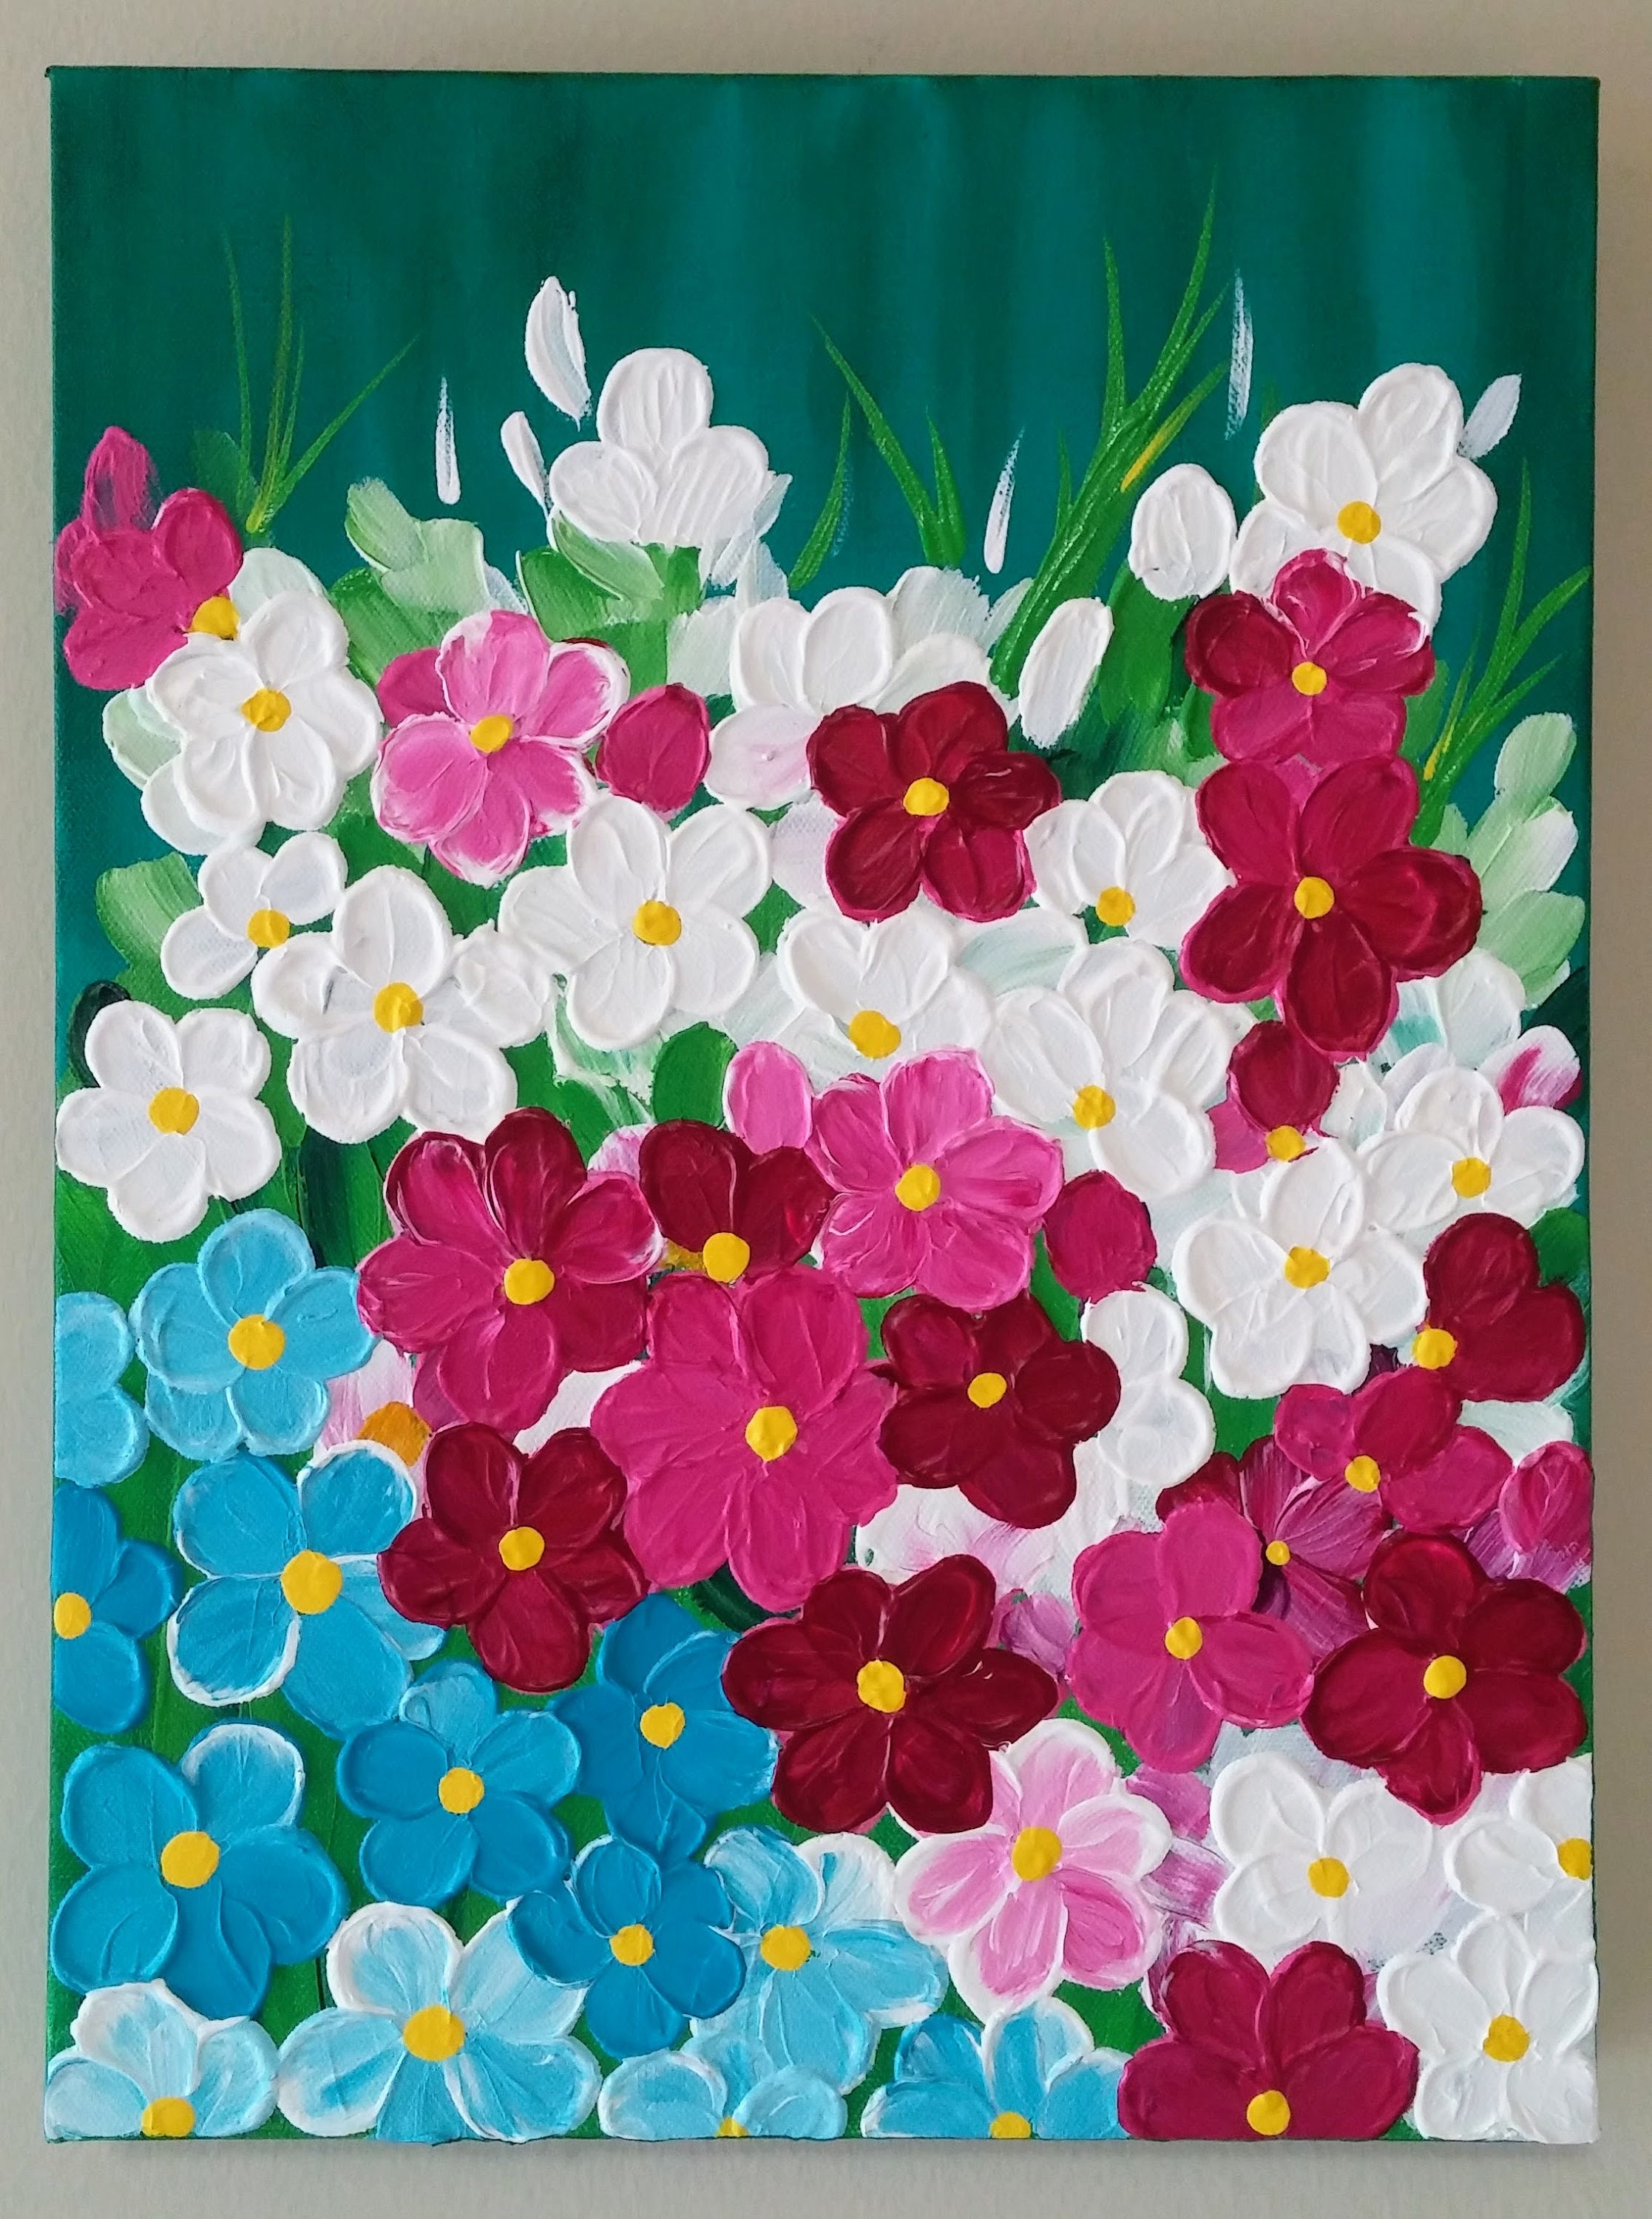 Original Acrylic Wall Art 11x14, Flower Painting, Floral Painting